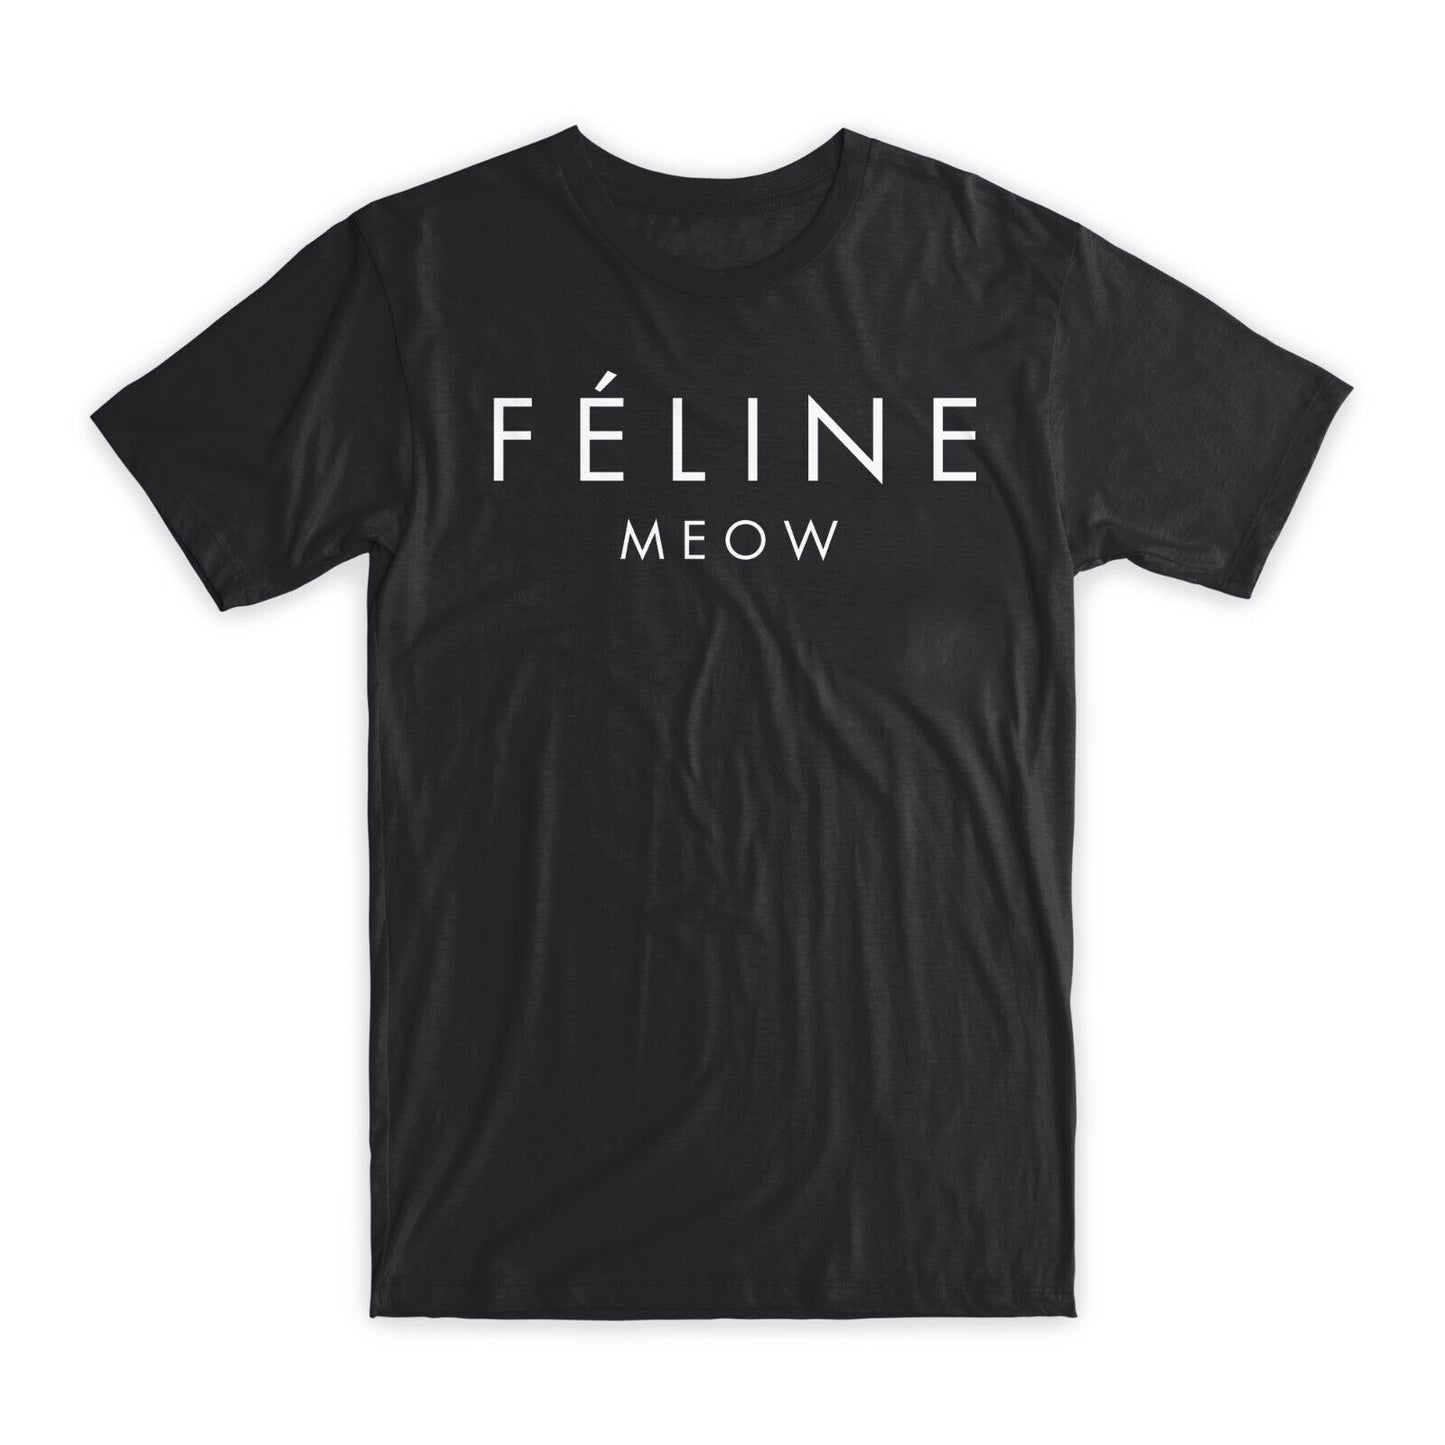 Feline Meow T-Shirt Premium Soft Cotton Crew Neck Funny Tees Novelty Gifts NEW